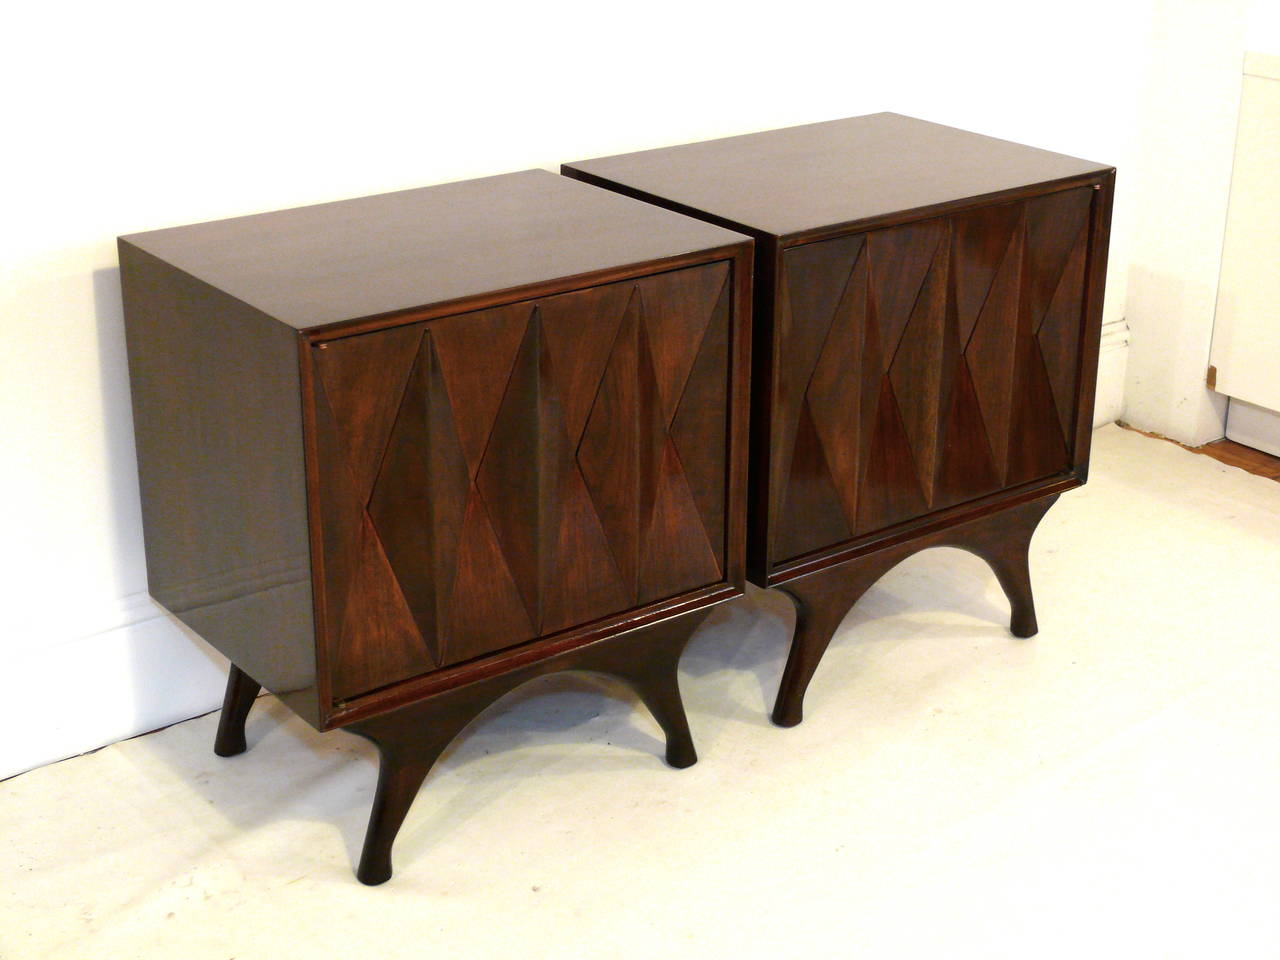 Fantastic pair of Mid-Century end tables or nightstands with gorgeous front bdiamond detailing, sculptural legs, finished in a rich high gloss medium walnut. Each end table features a single inner removable shelf.